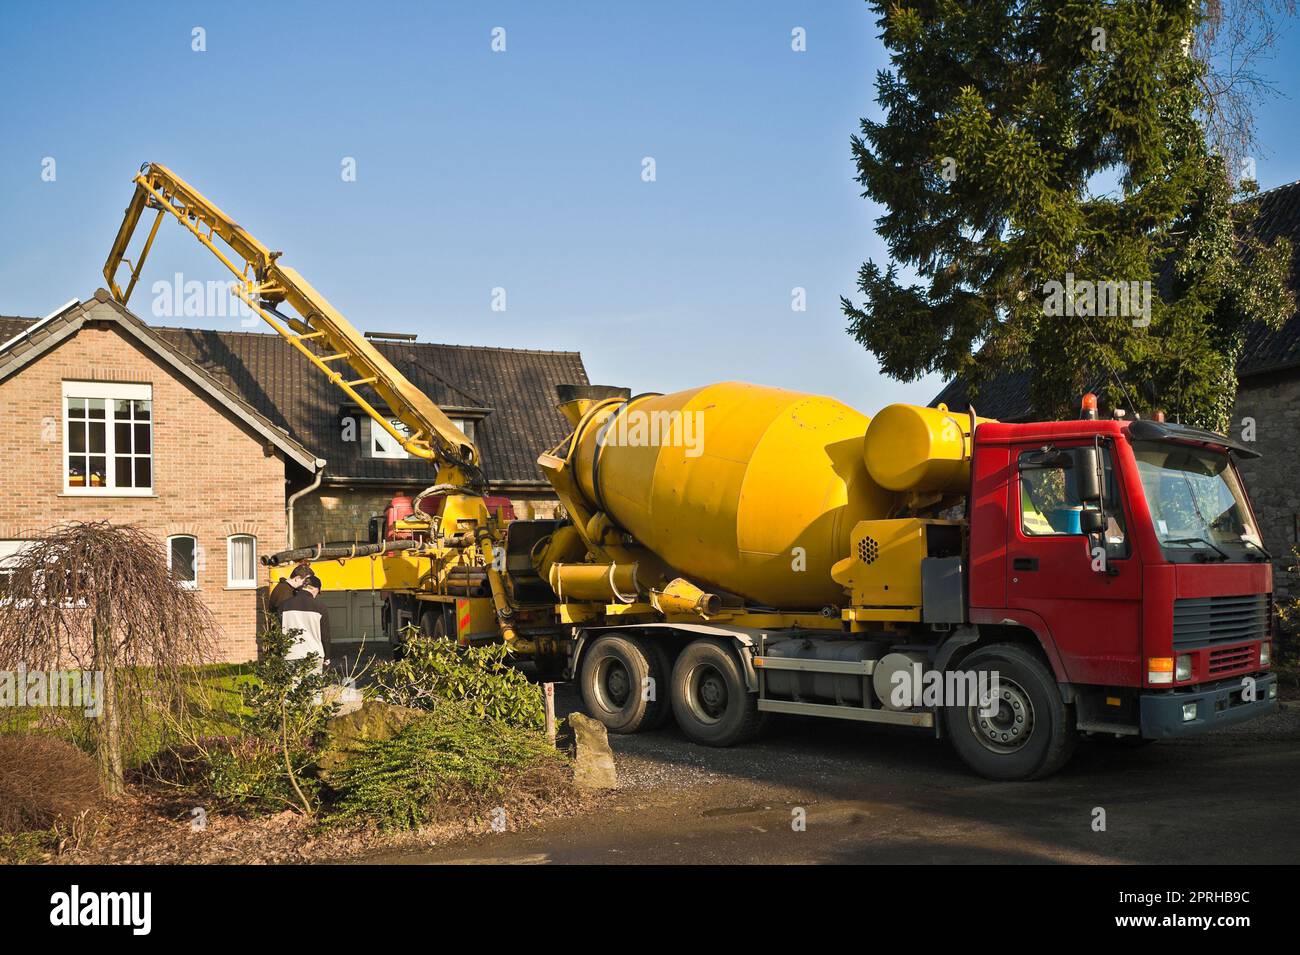 Truck-mounted concrete pump pumping concrete behind a single-family house Stock Photo